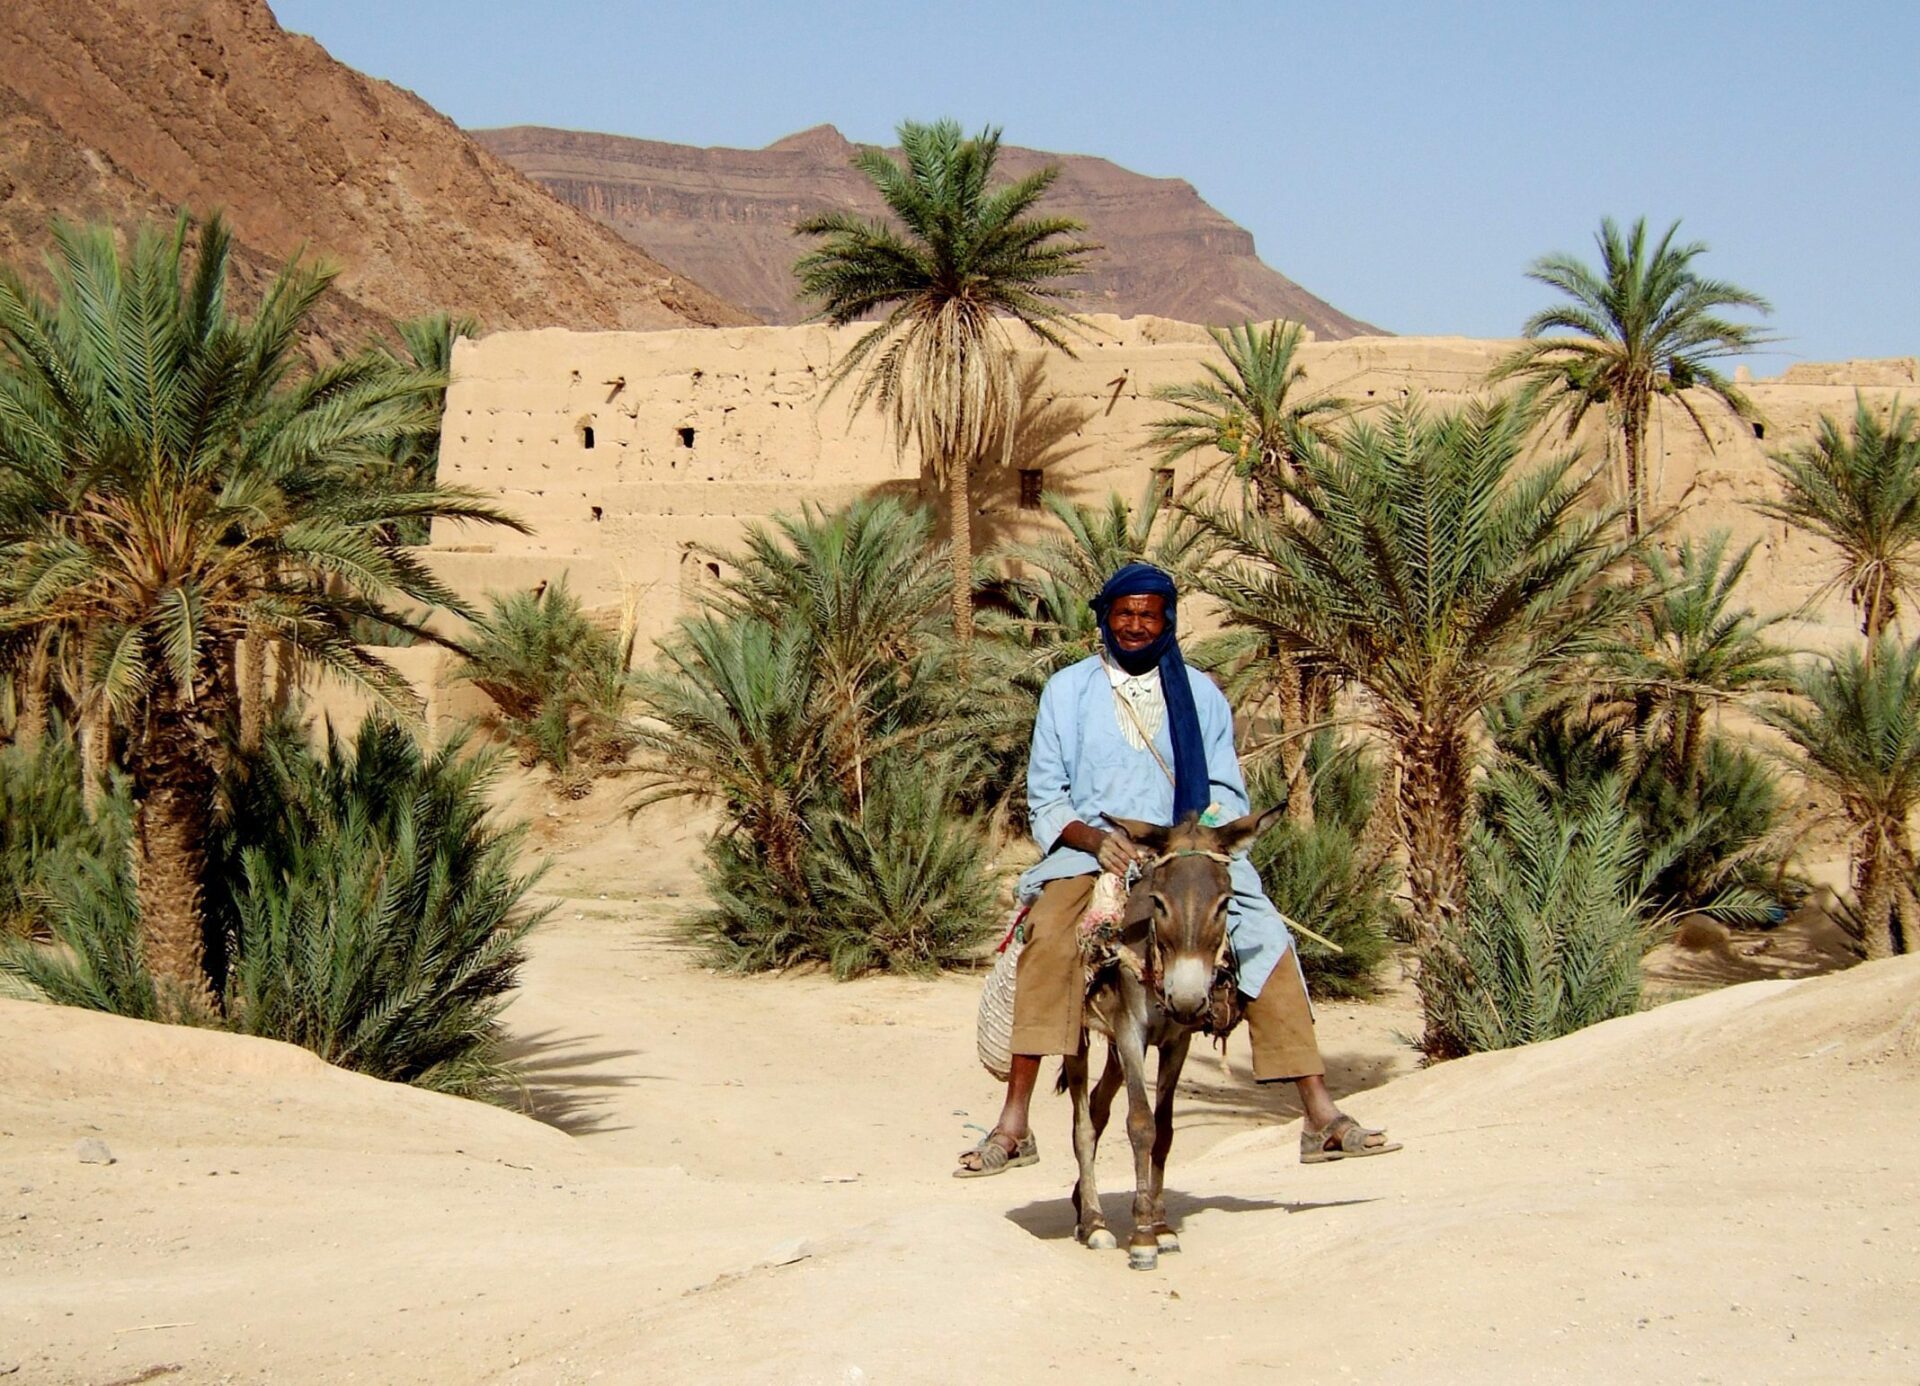 local riding a donkey with palms and buiding in backgound on Morocco safari